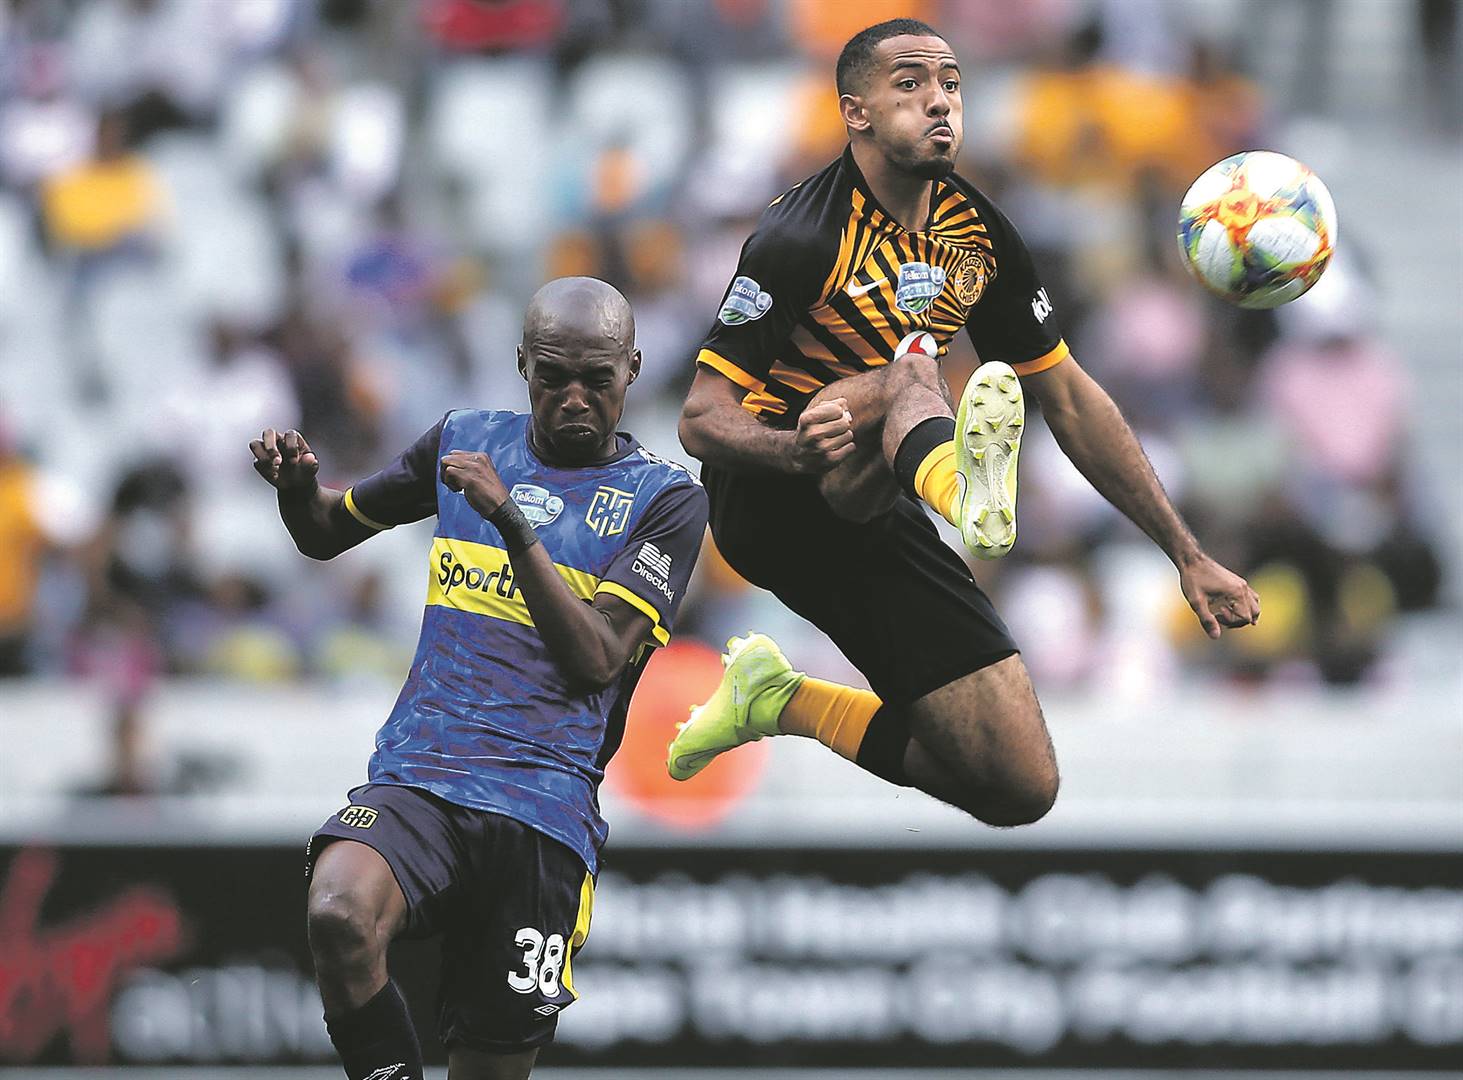 Reeve Frosler of Kaizer Chiefs wins the cross ball from Zukile Kewuti of Cape Town City during the Telkom Knockout clash at the Cape Town Stadium yesterday. Picture: Shaun Roy / Gallo Images